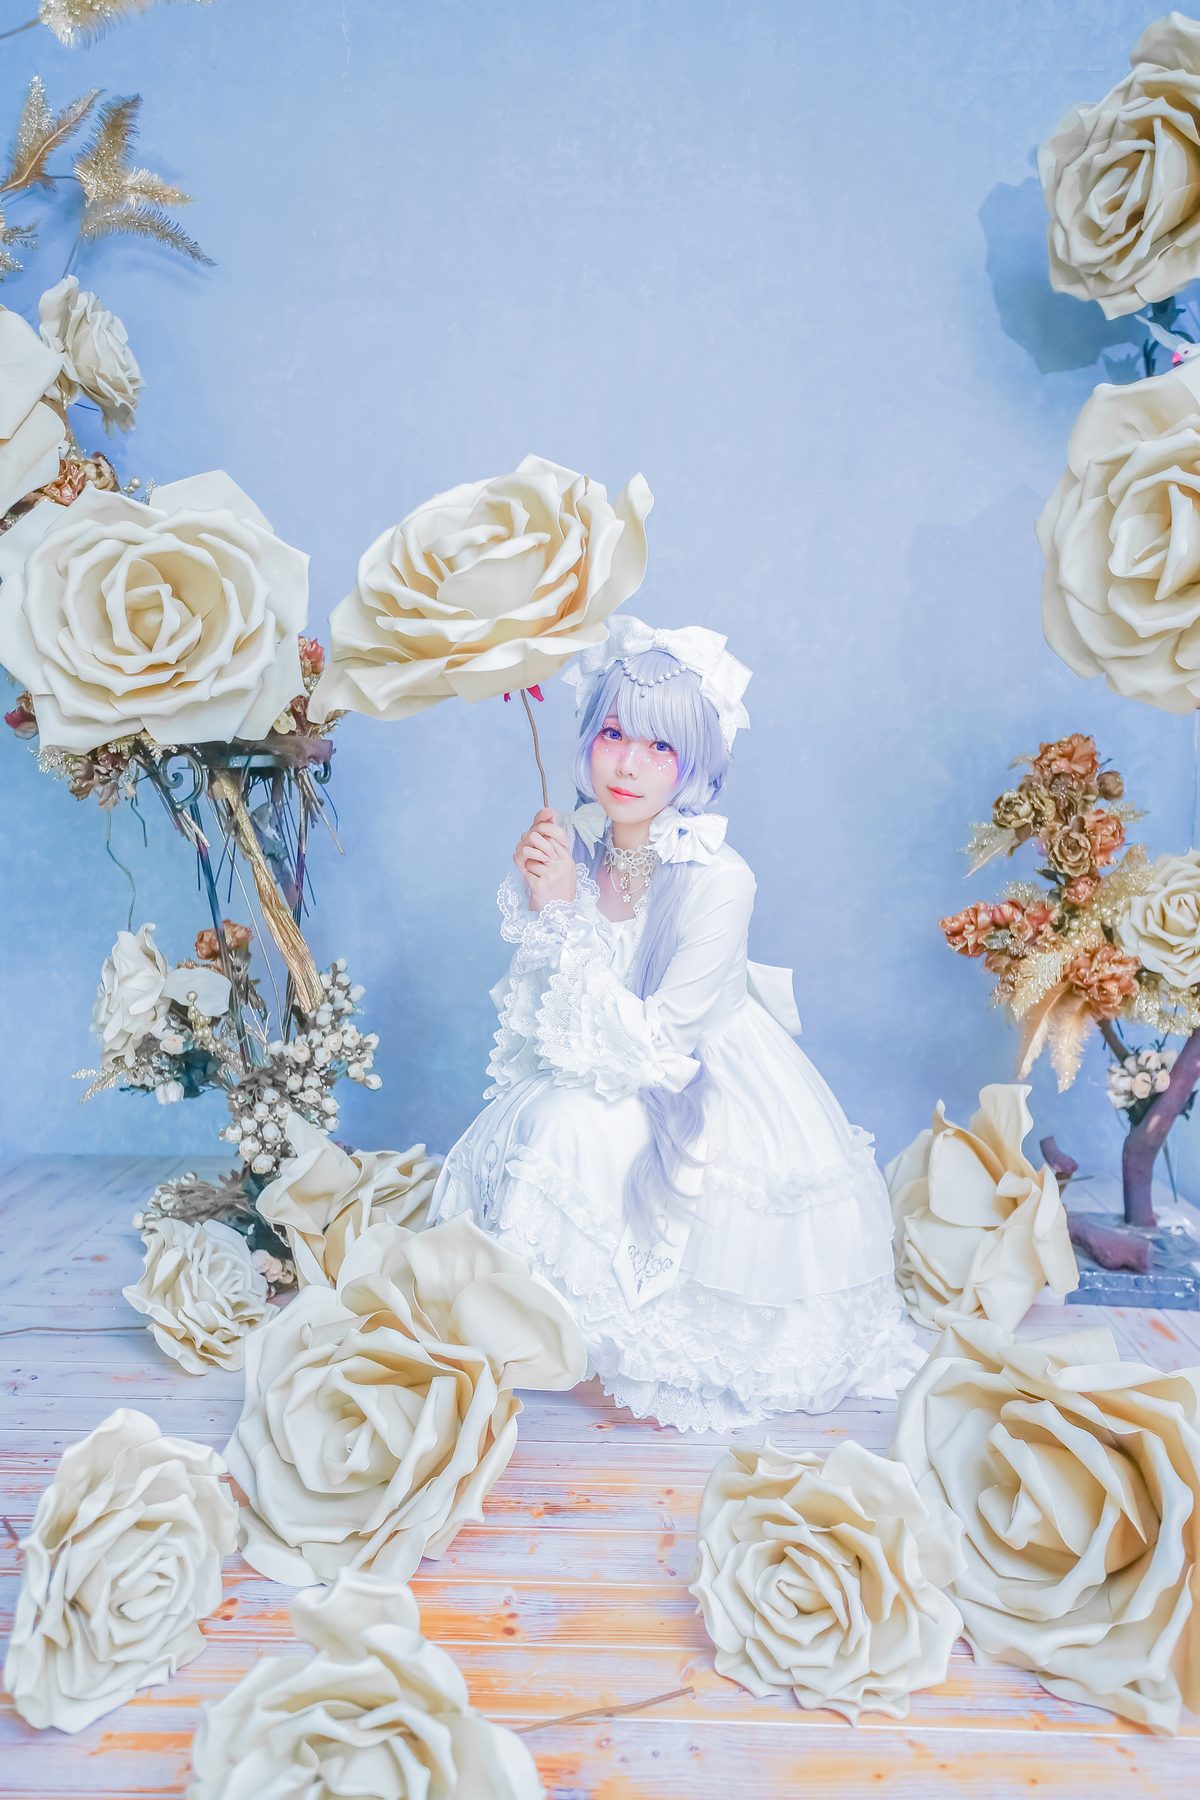 Coser@Ely_eee ElyEE子 TUESDAY TWINTAIL A 0061 1842381668.jpg